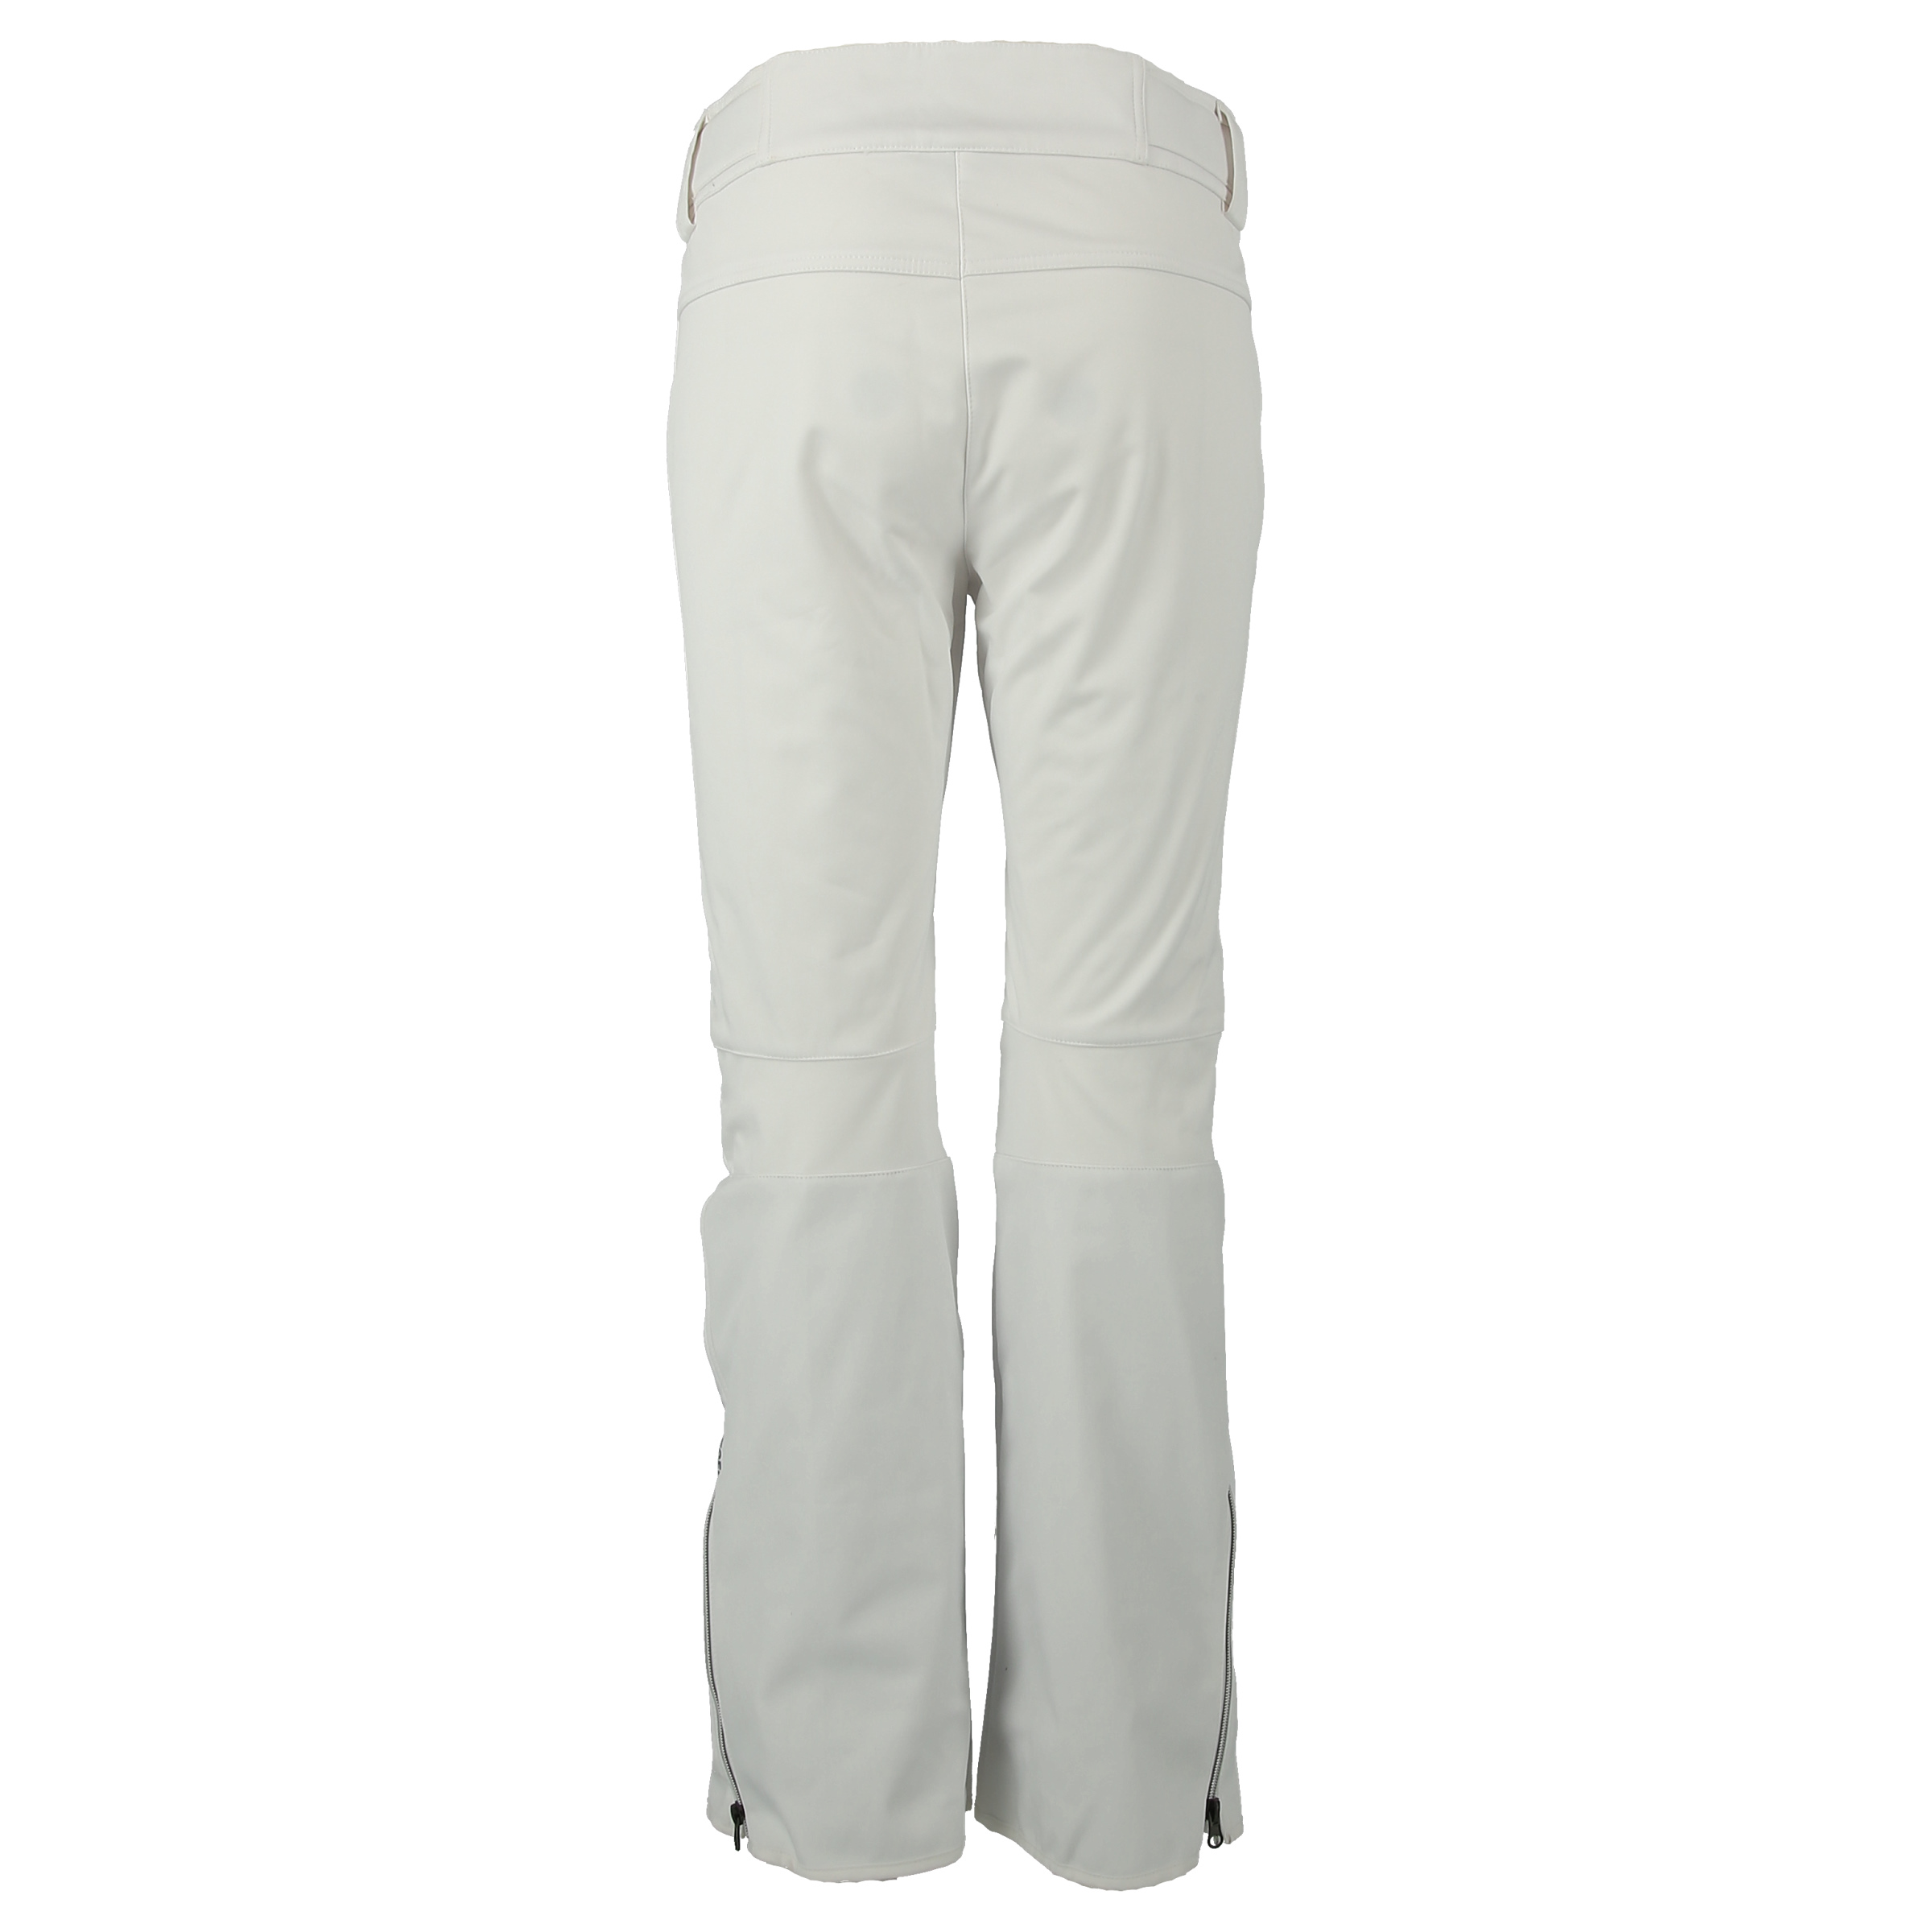 Ellesse LYNX PANT CARRY OVER 